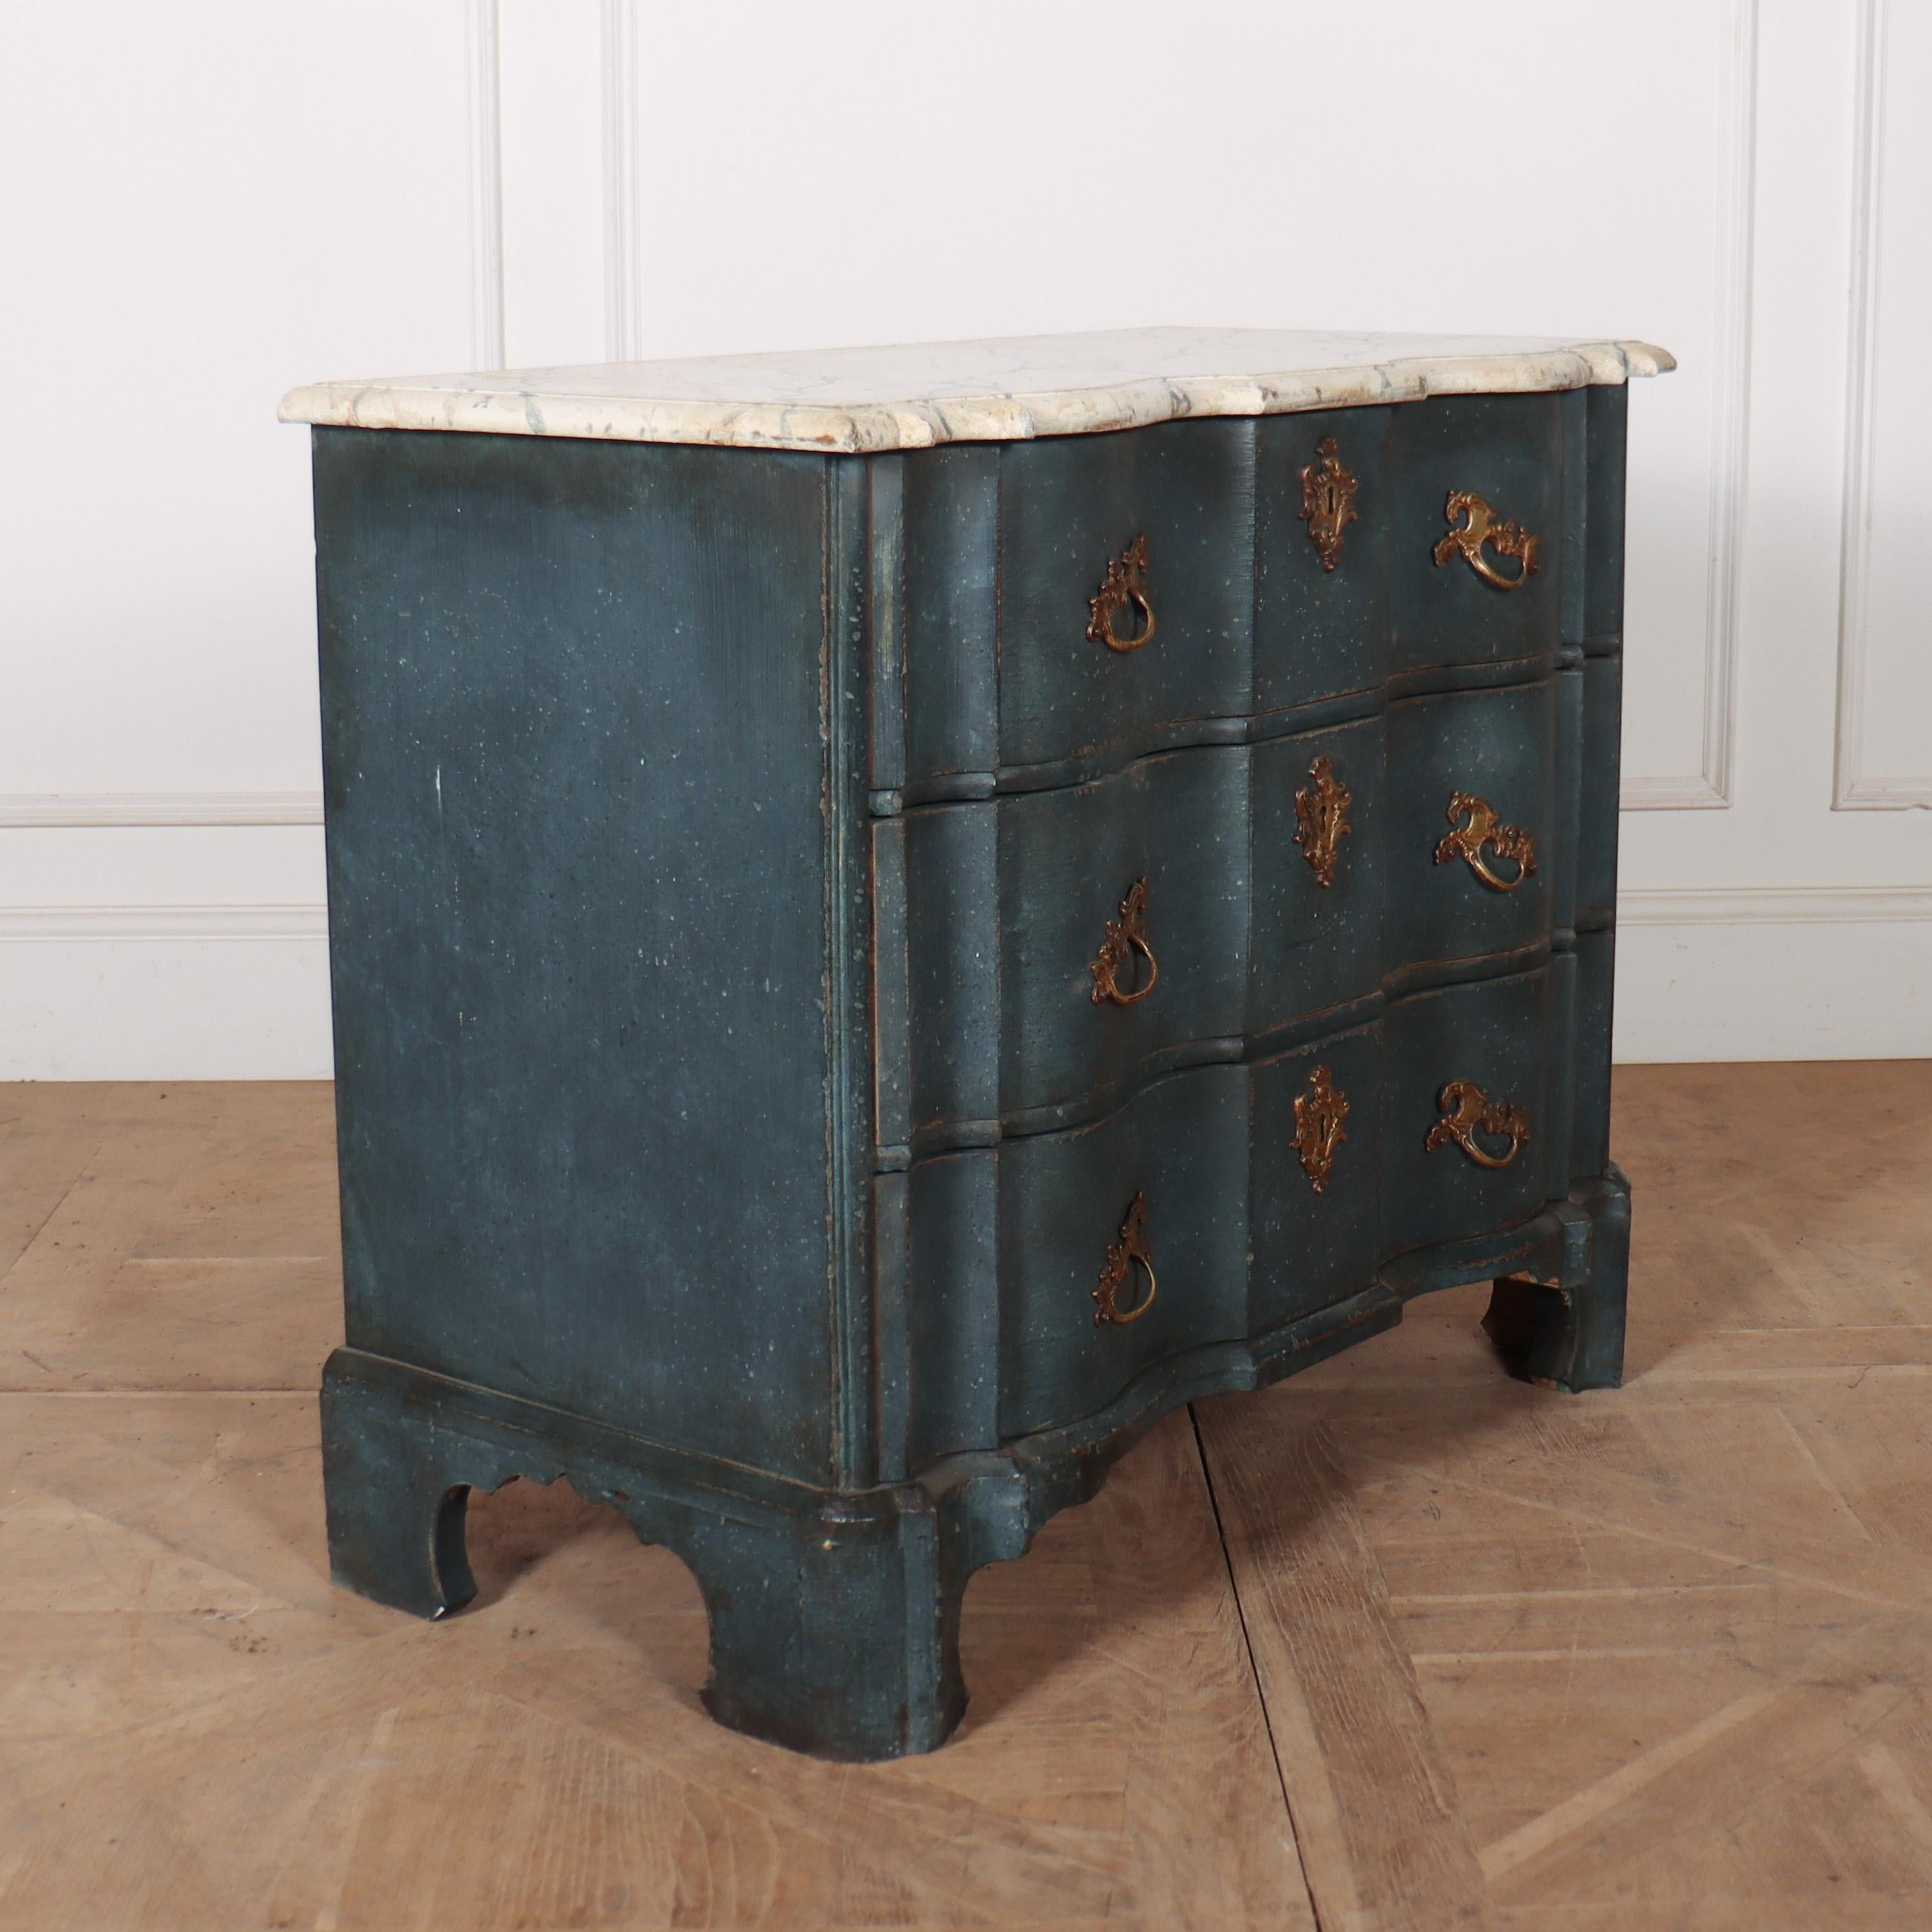 Small 18th C Dutch serpentine front 3 drawer painted oak commode with a faux marble top. 1790.

Reference: 8114

Dimensions
35 inches (89 cms) Wide
18 inches (46 cms) Deep
29.5 inches (75 cms) High